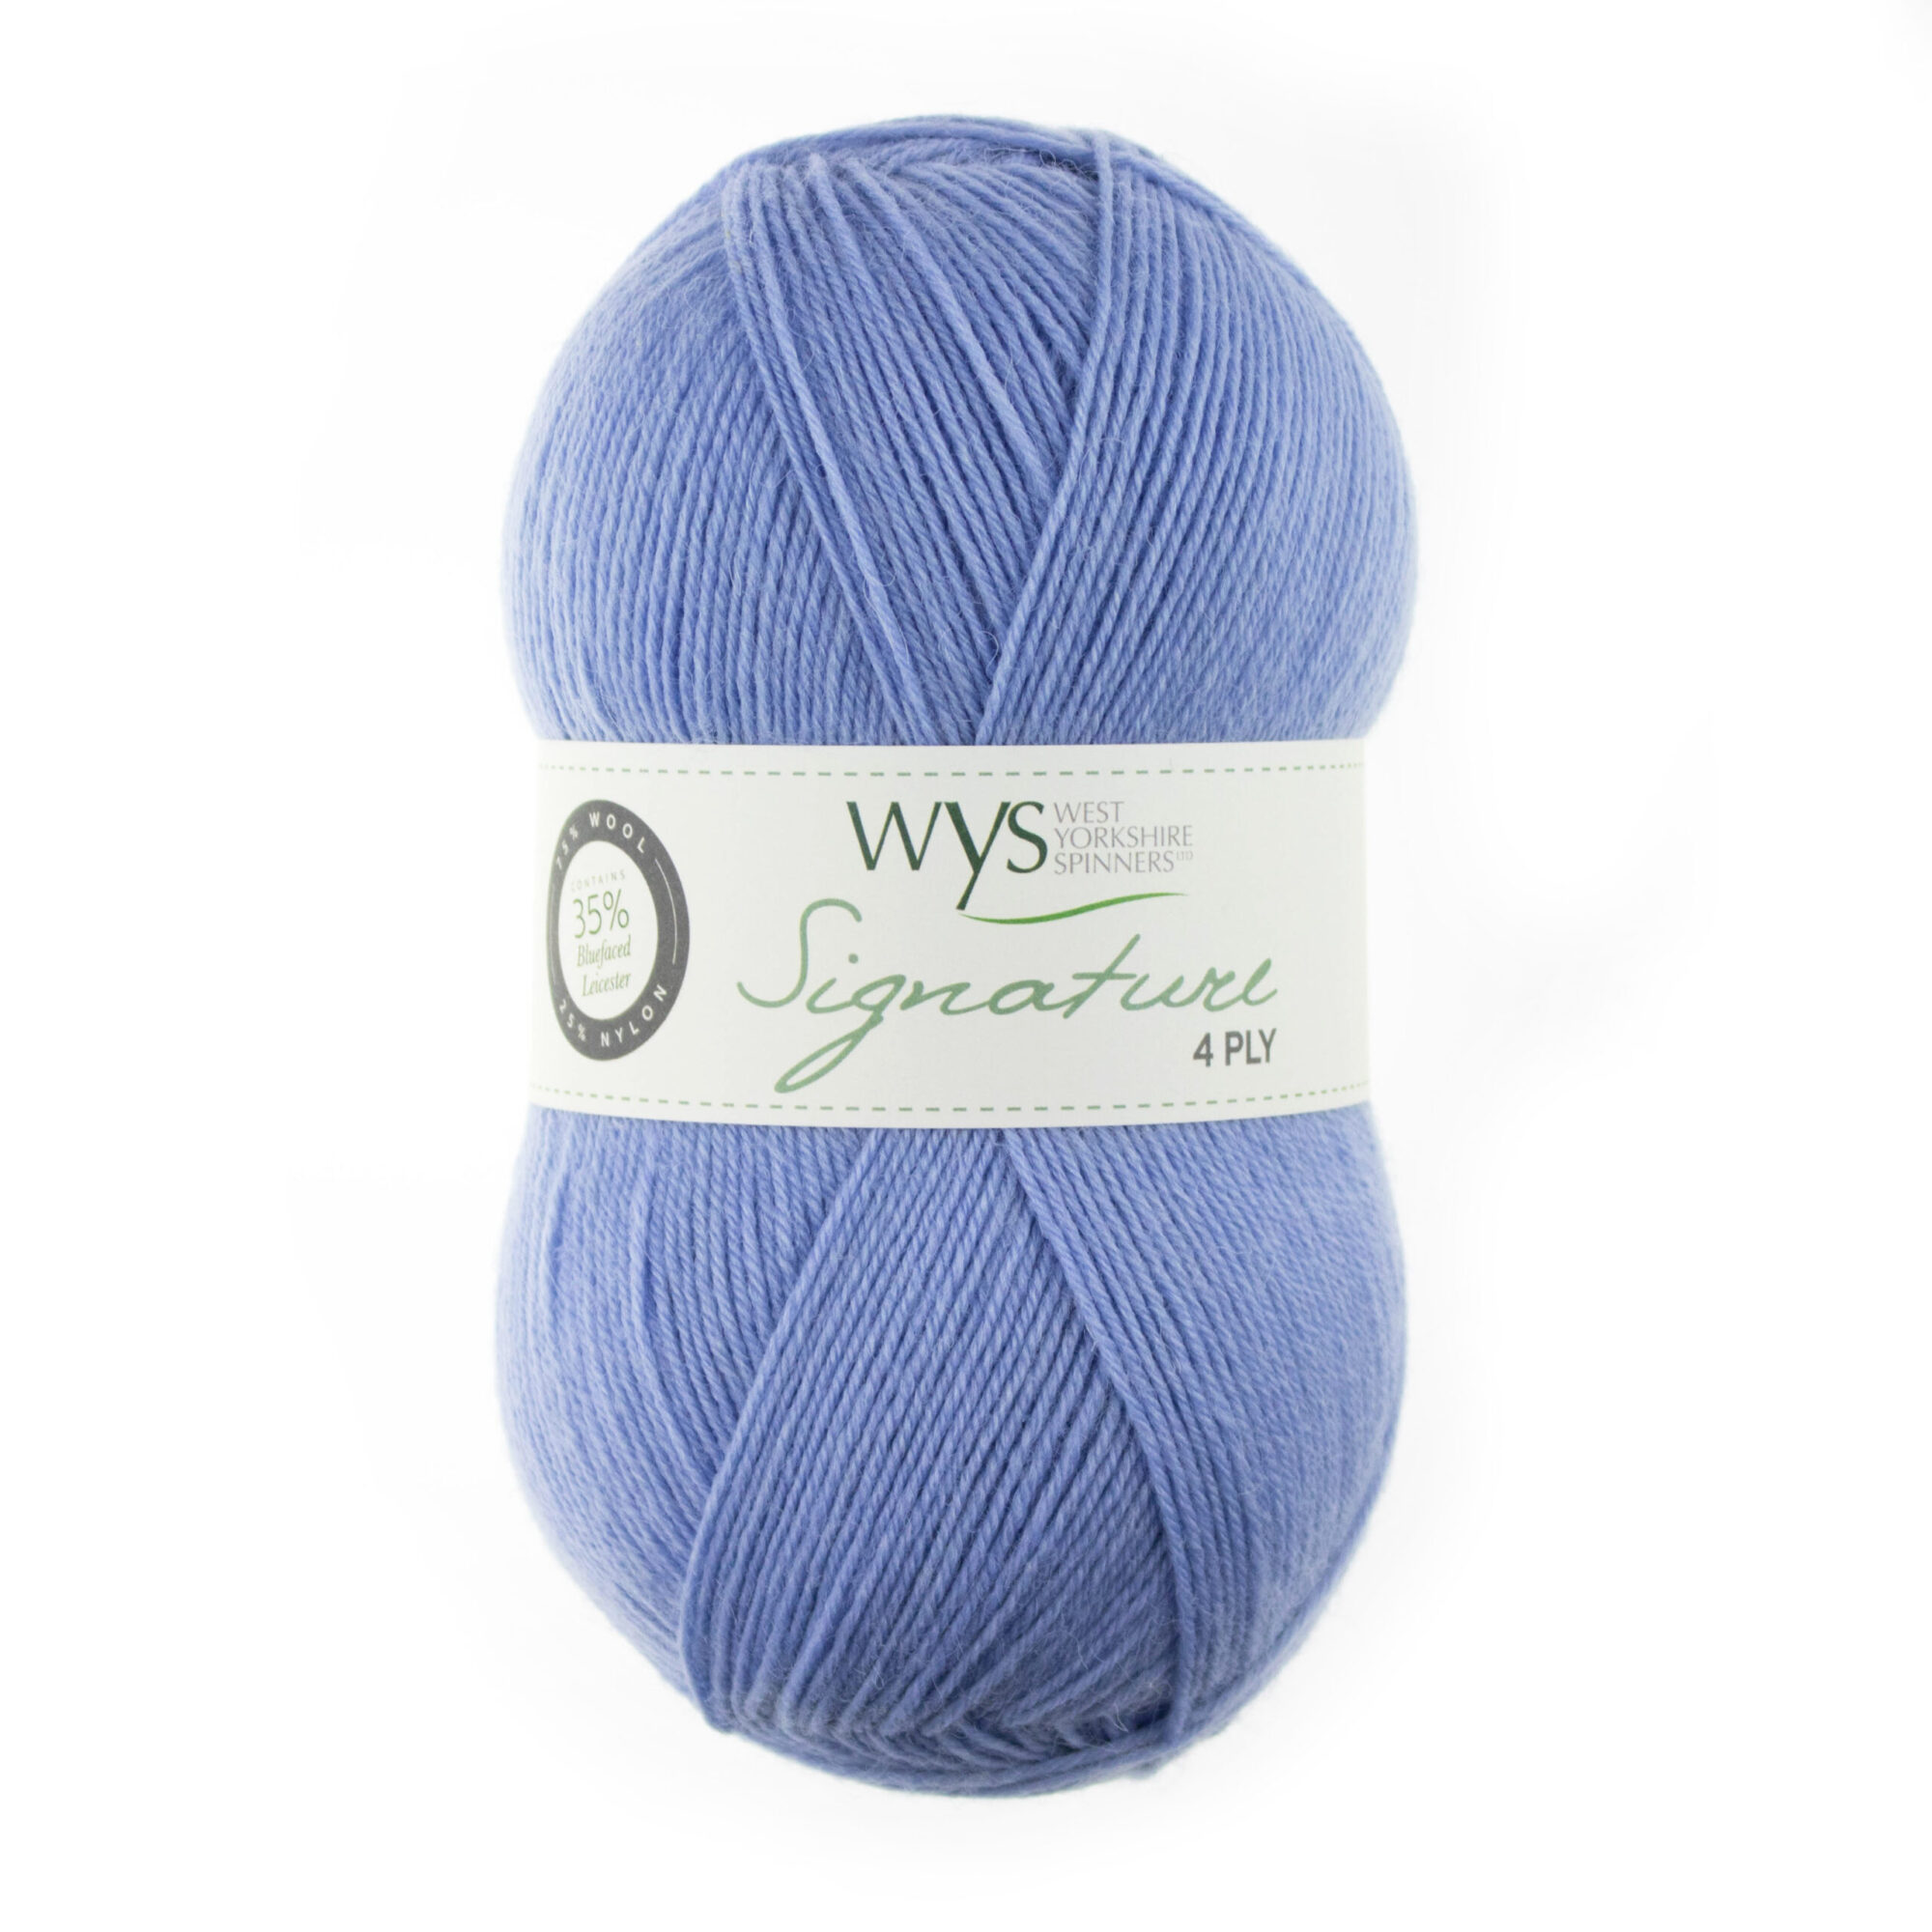 West Yorkshire Spinners Signature 4ply - The Florist Collection - 325 Cornflower product image